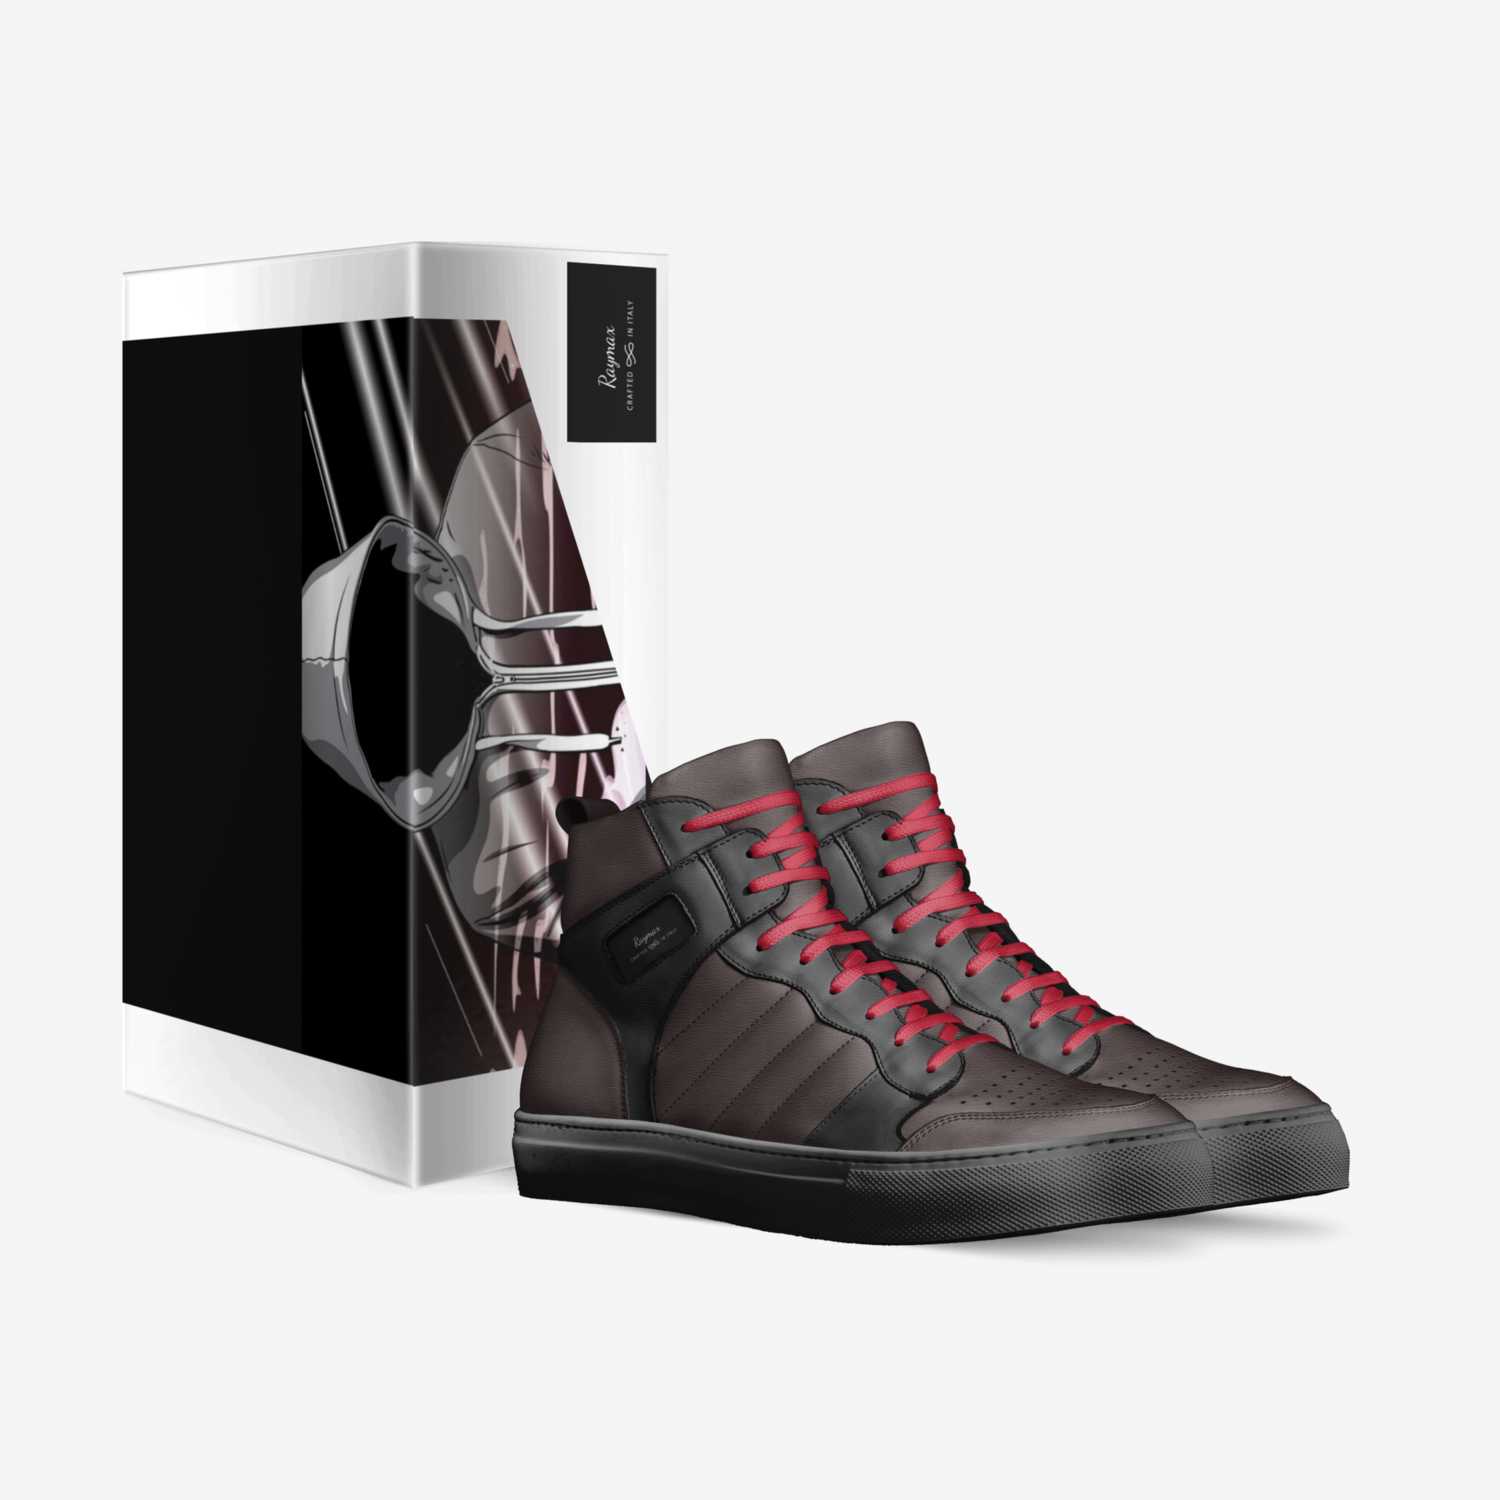 Raymax  custom made in Italy shoes by Rowan Mcclain | Box view